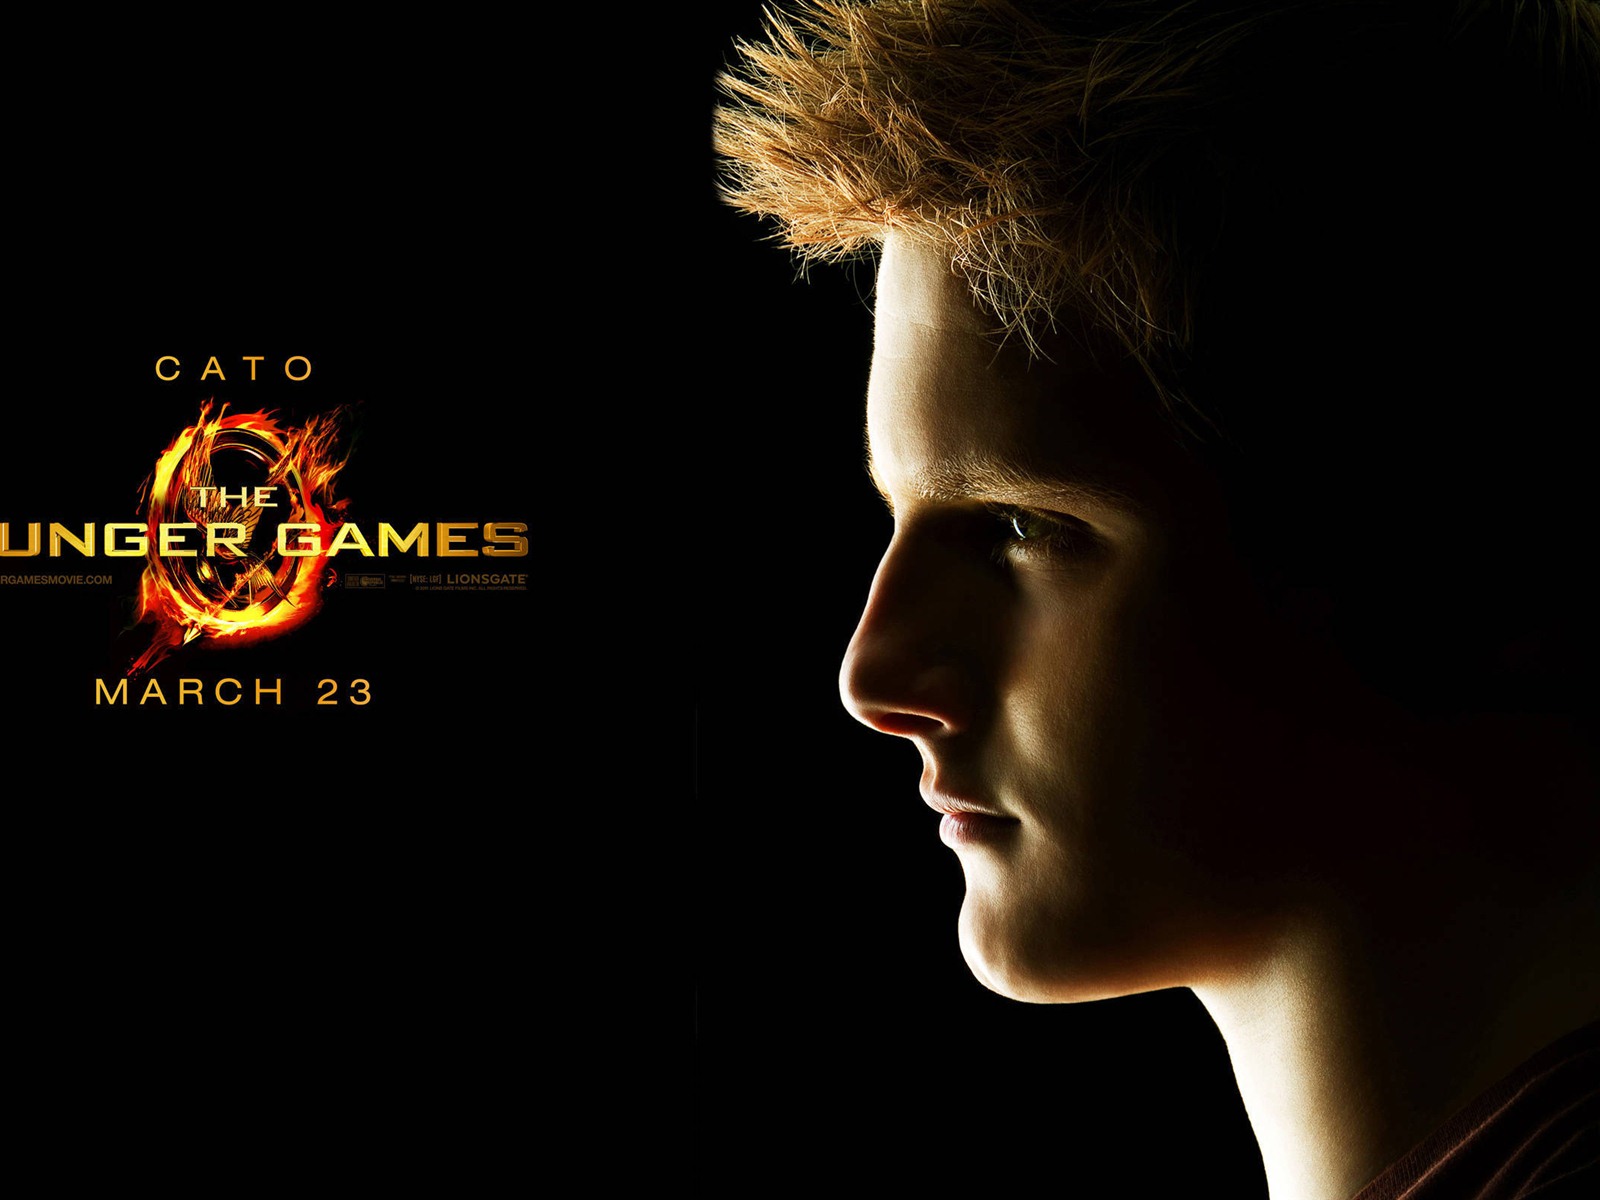 The Hunger Games HD wallpapers #3 - 1600x1200